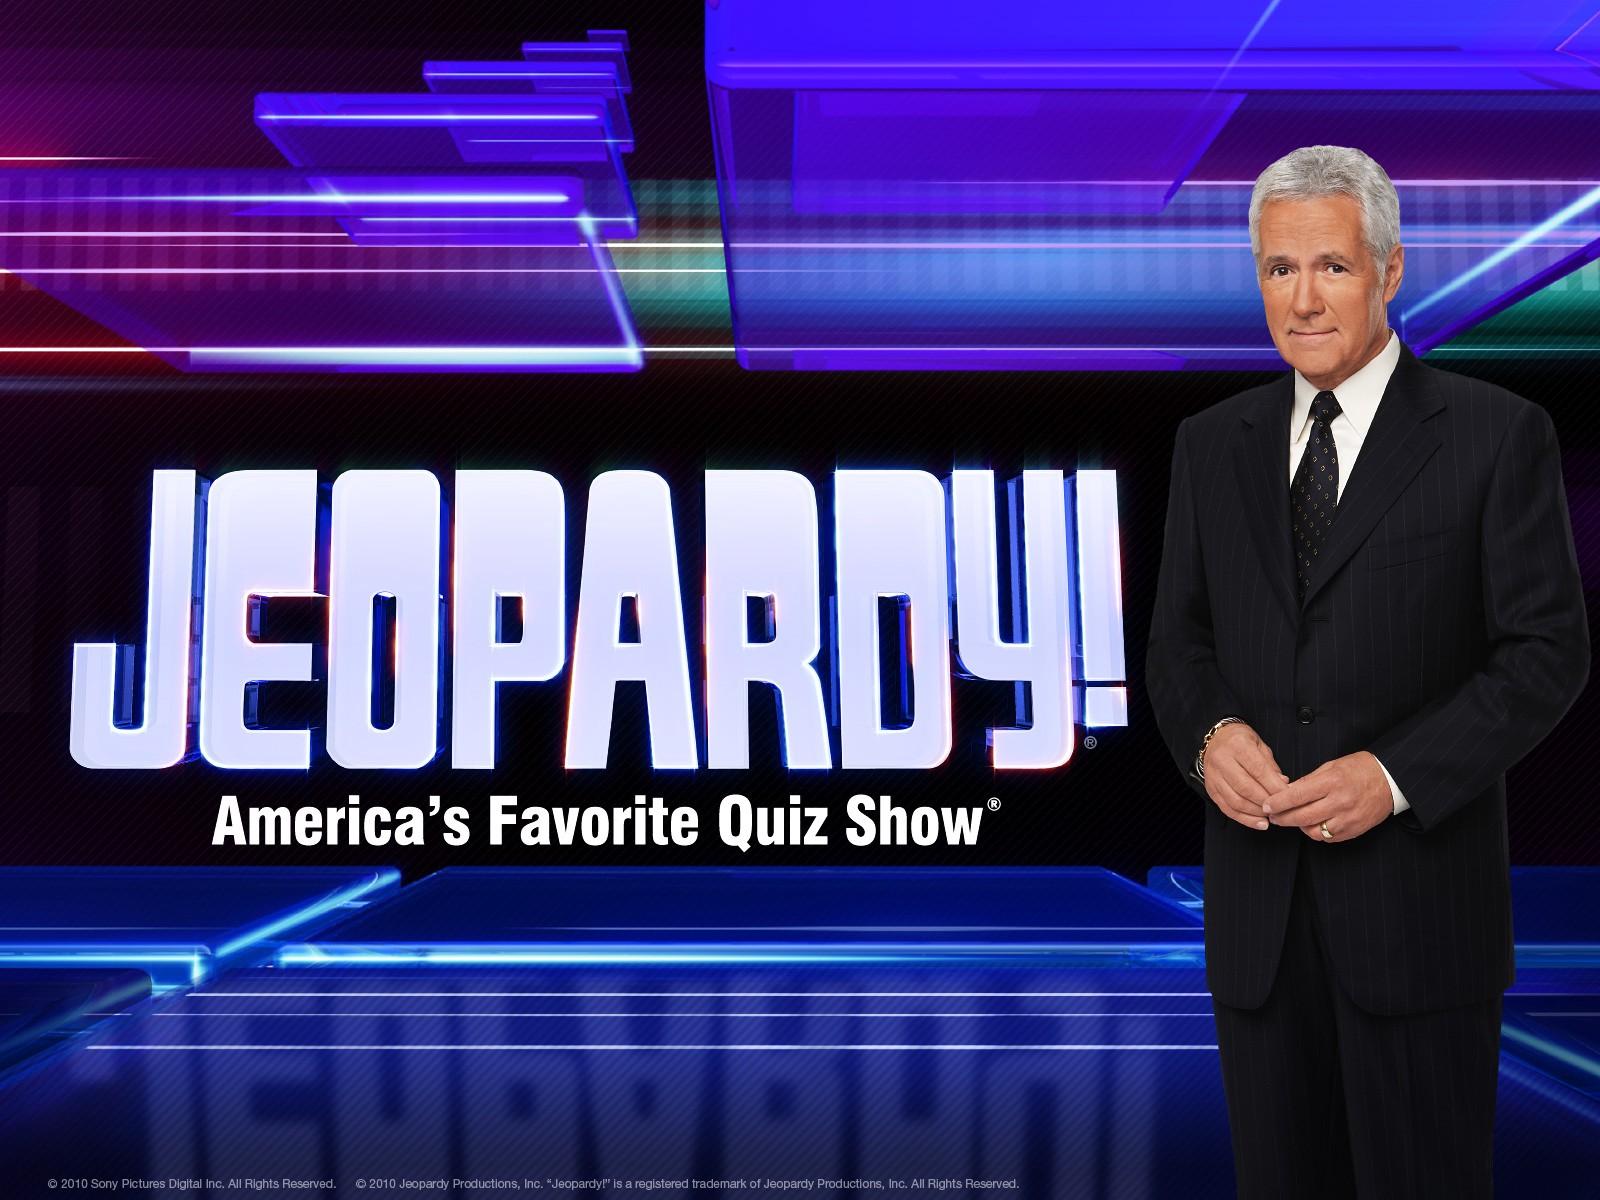 Trump Makes Final “Jeopardy!” Appearance Before Taking Office